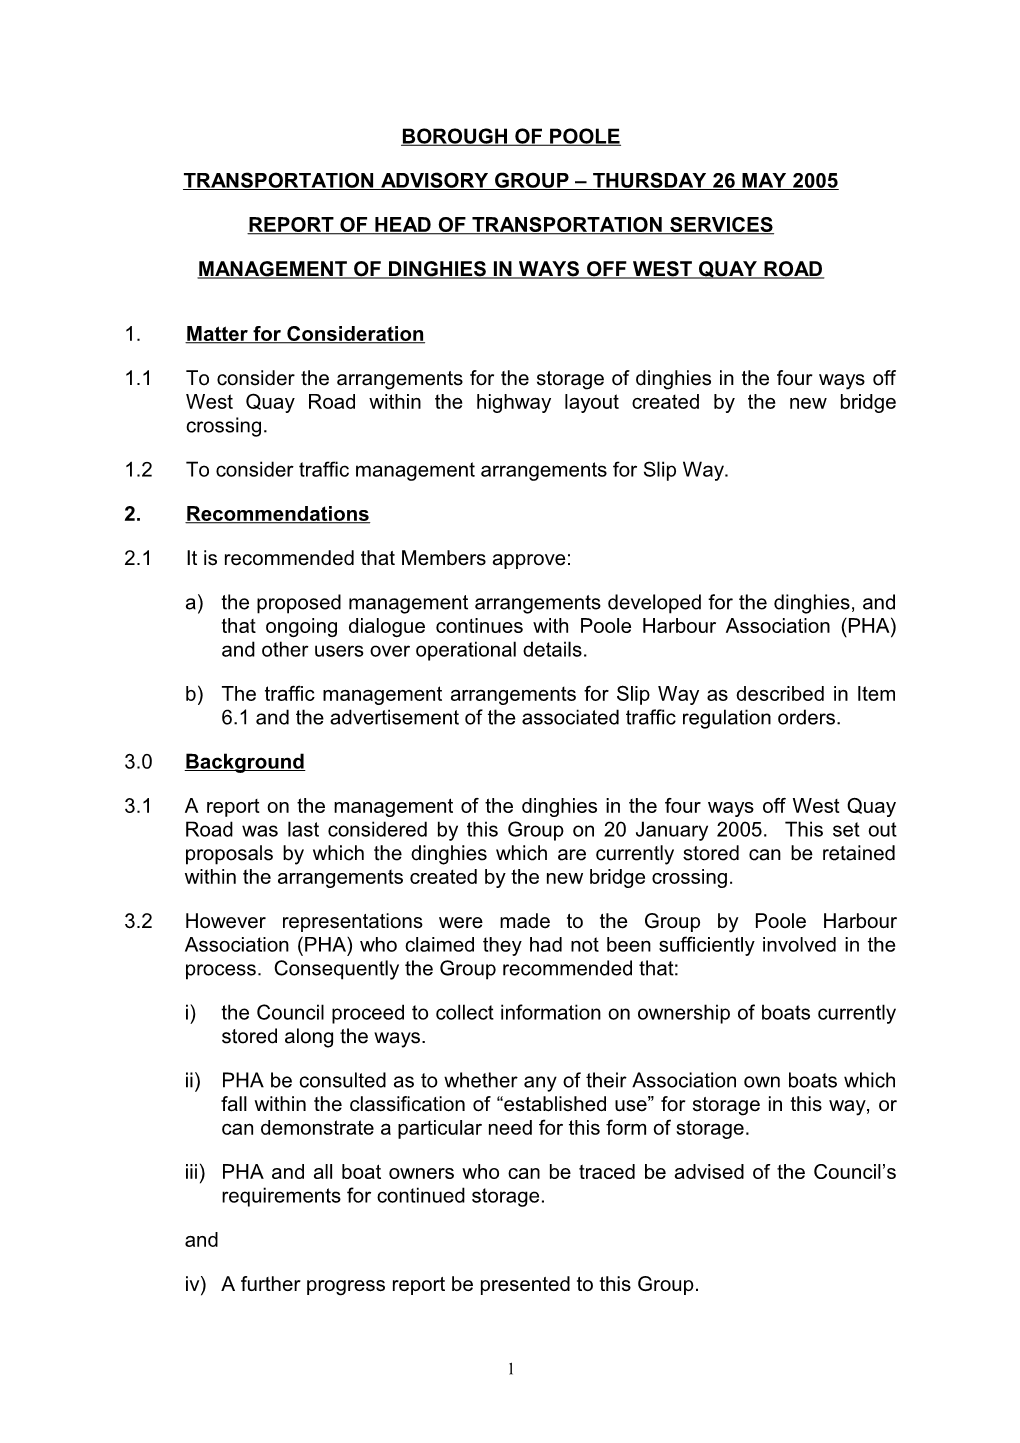 Management of Dinghies in Ways Off West Quay Road